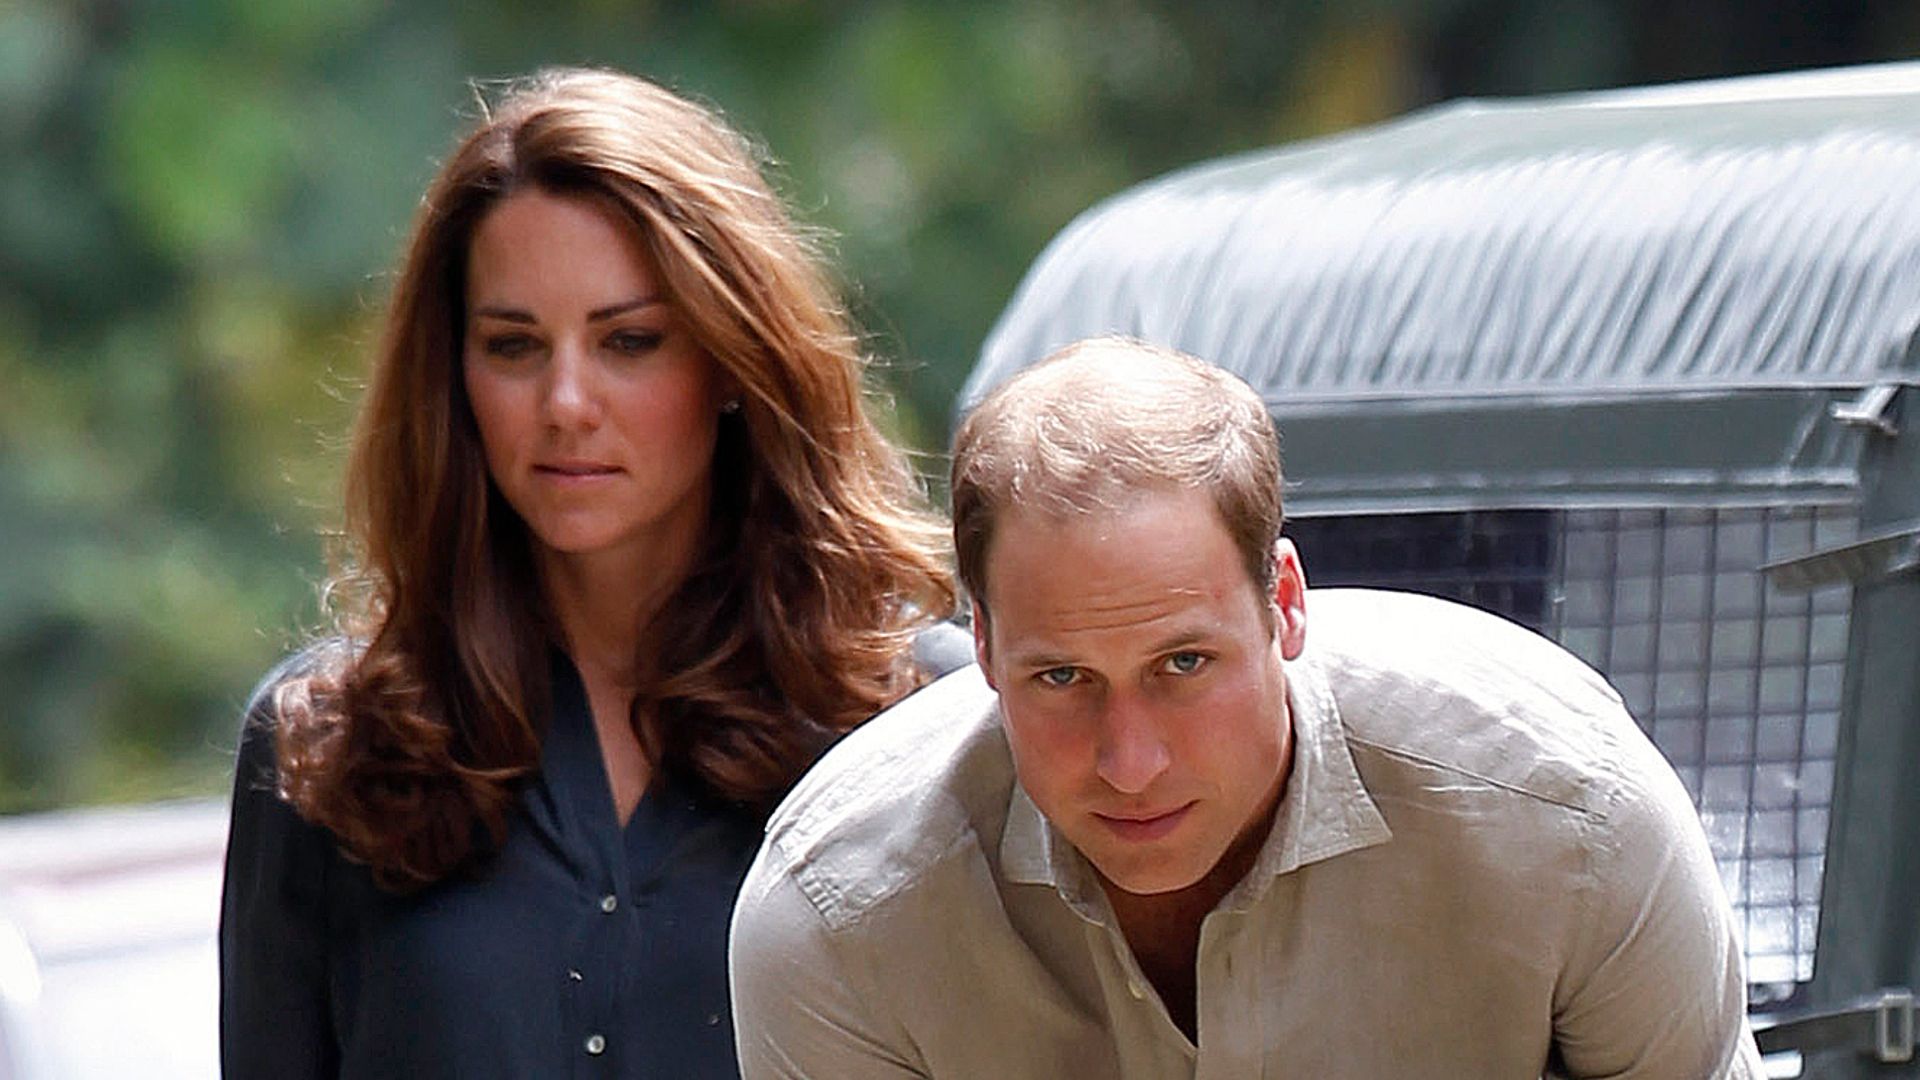 Prince William and Kate looked serious as they arrived at the Borneo Rainforest Research Center in Danum Valley